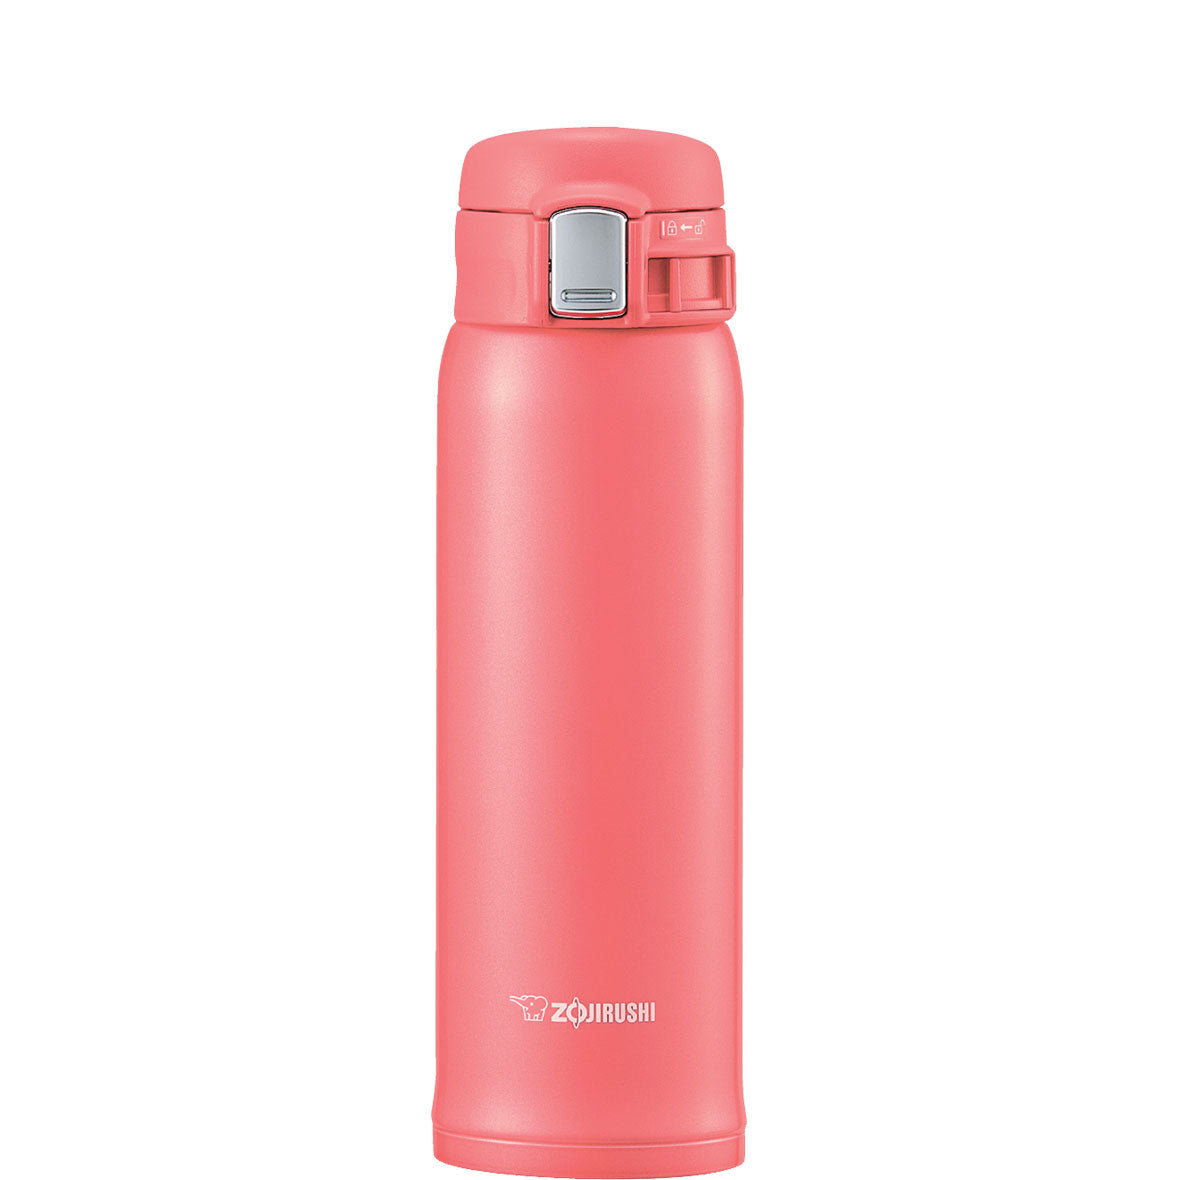 Zojirushi , Stainless Vacuum Insulated Tumbler, 15-ounce, Coral Pink